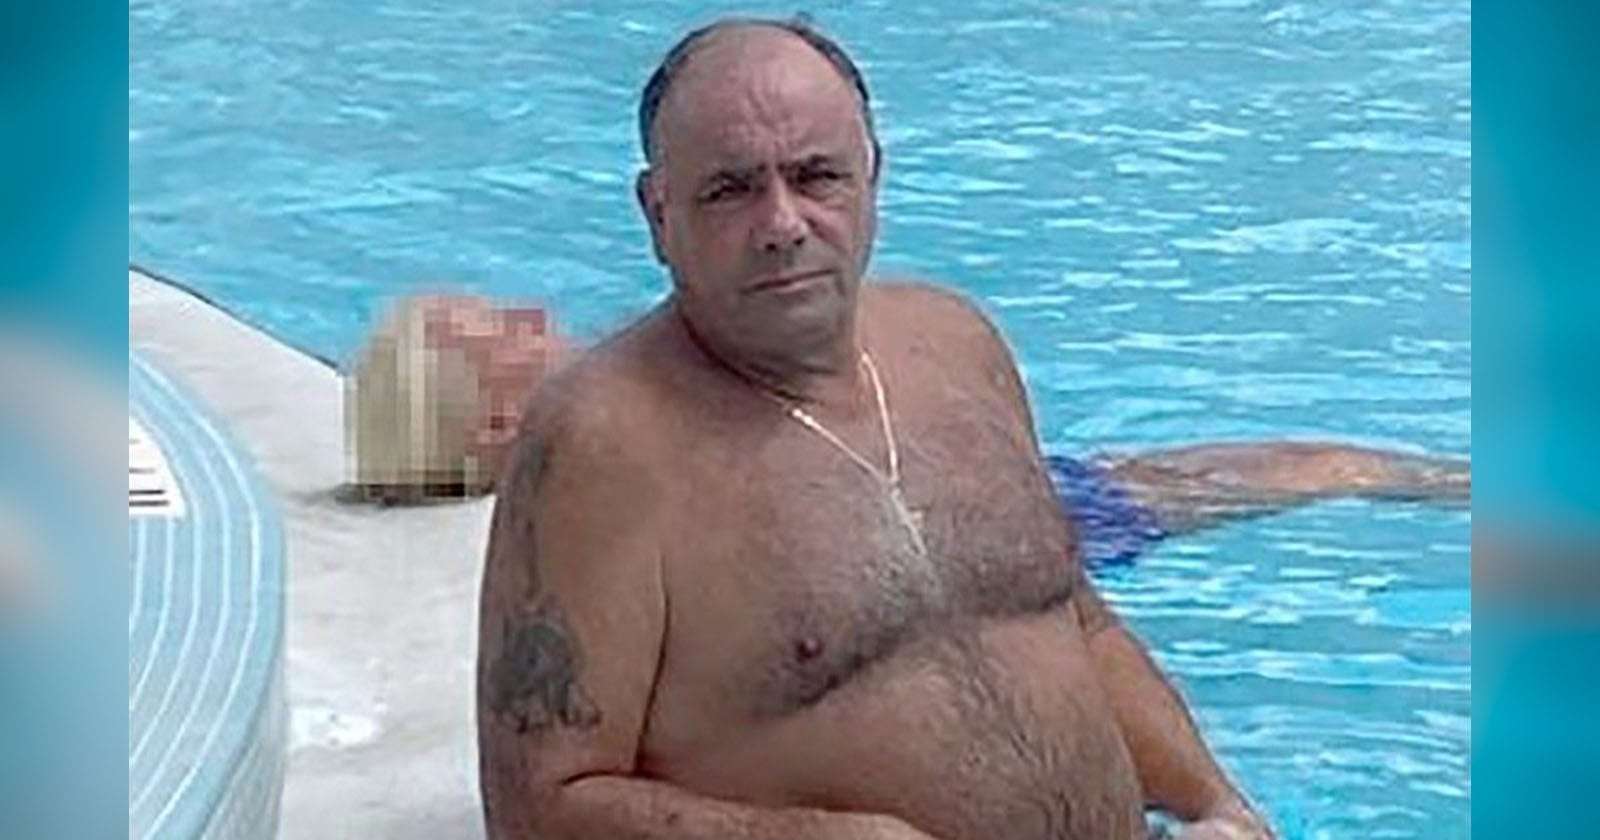 image for Mobster Does Not Regret the ‘Great’ Topless Photo That Led to Arrest